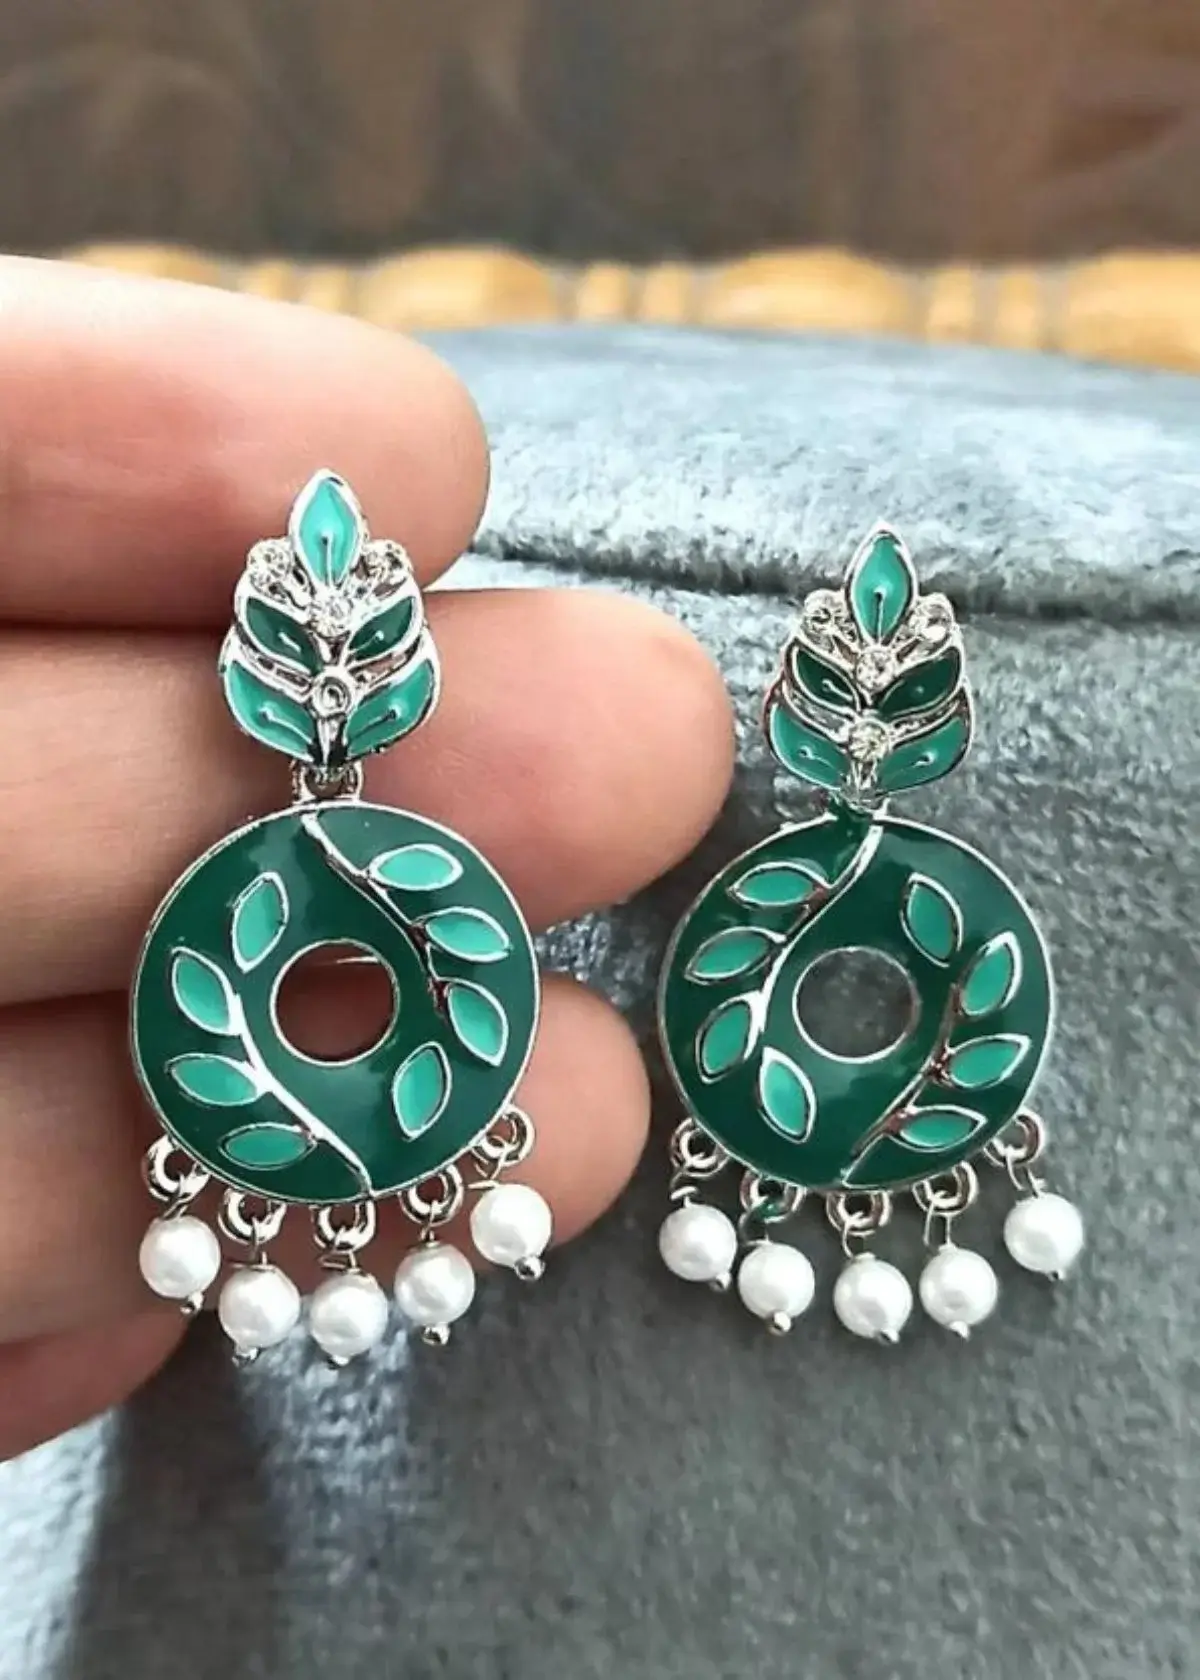 How to choose the right enamel earrings?